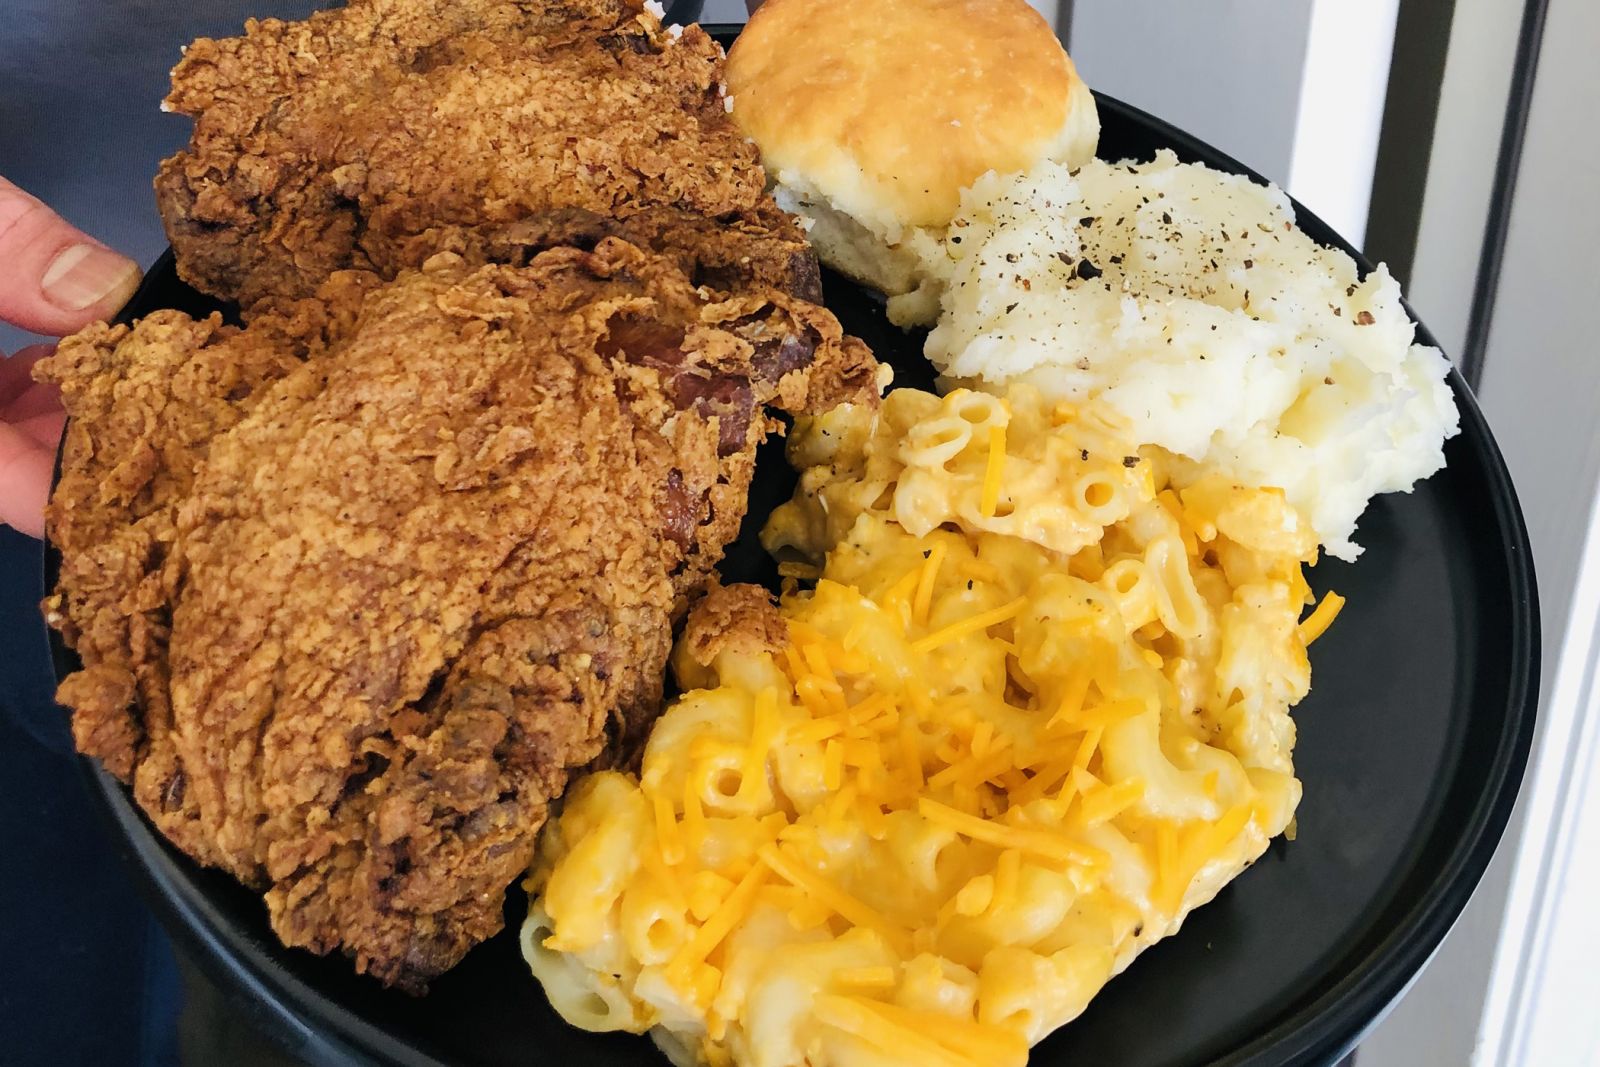 Showing off one of our Fried Chicken Plates with two sides and a roll